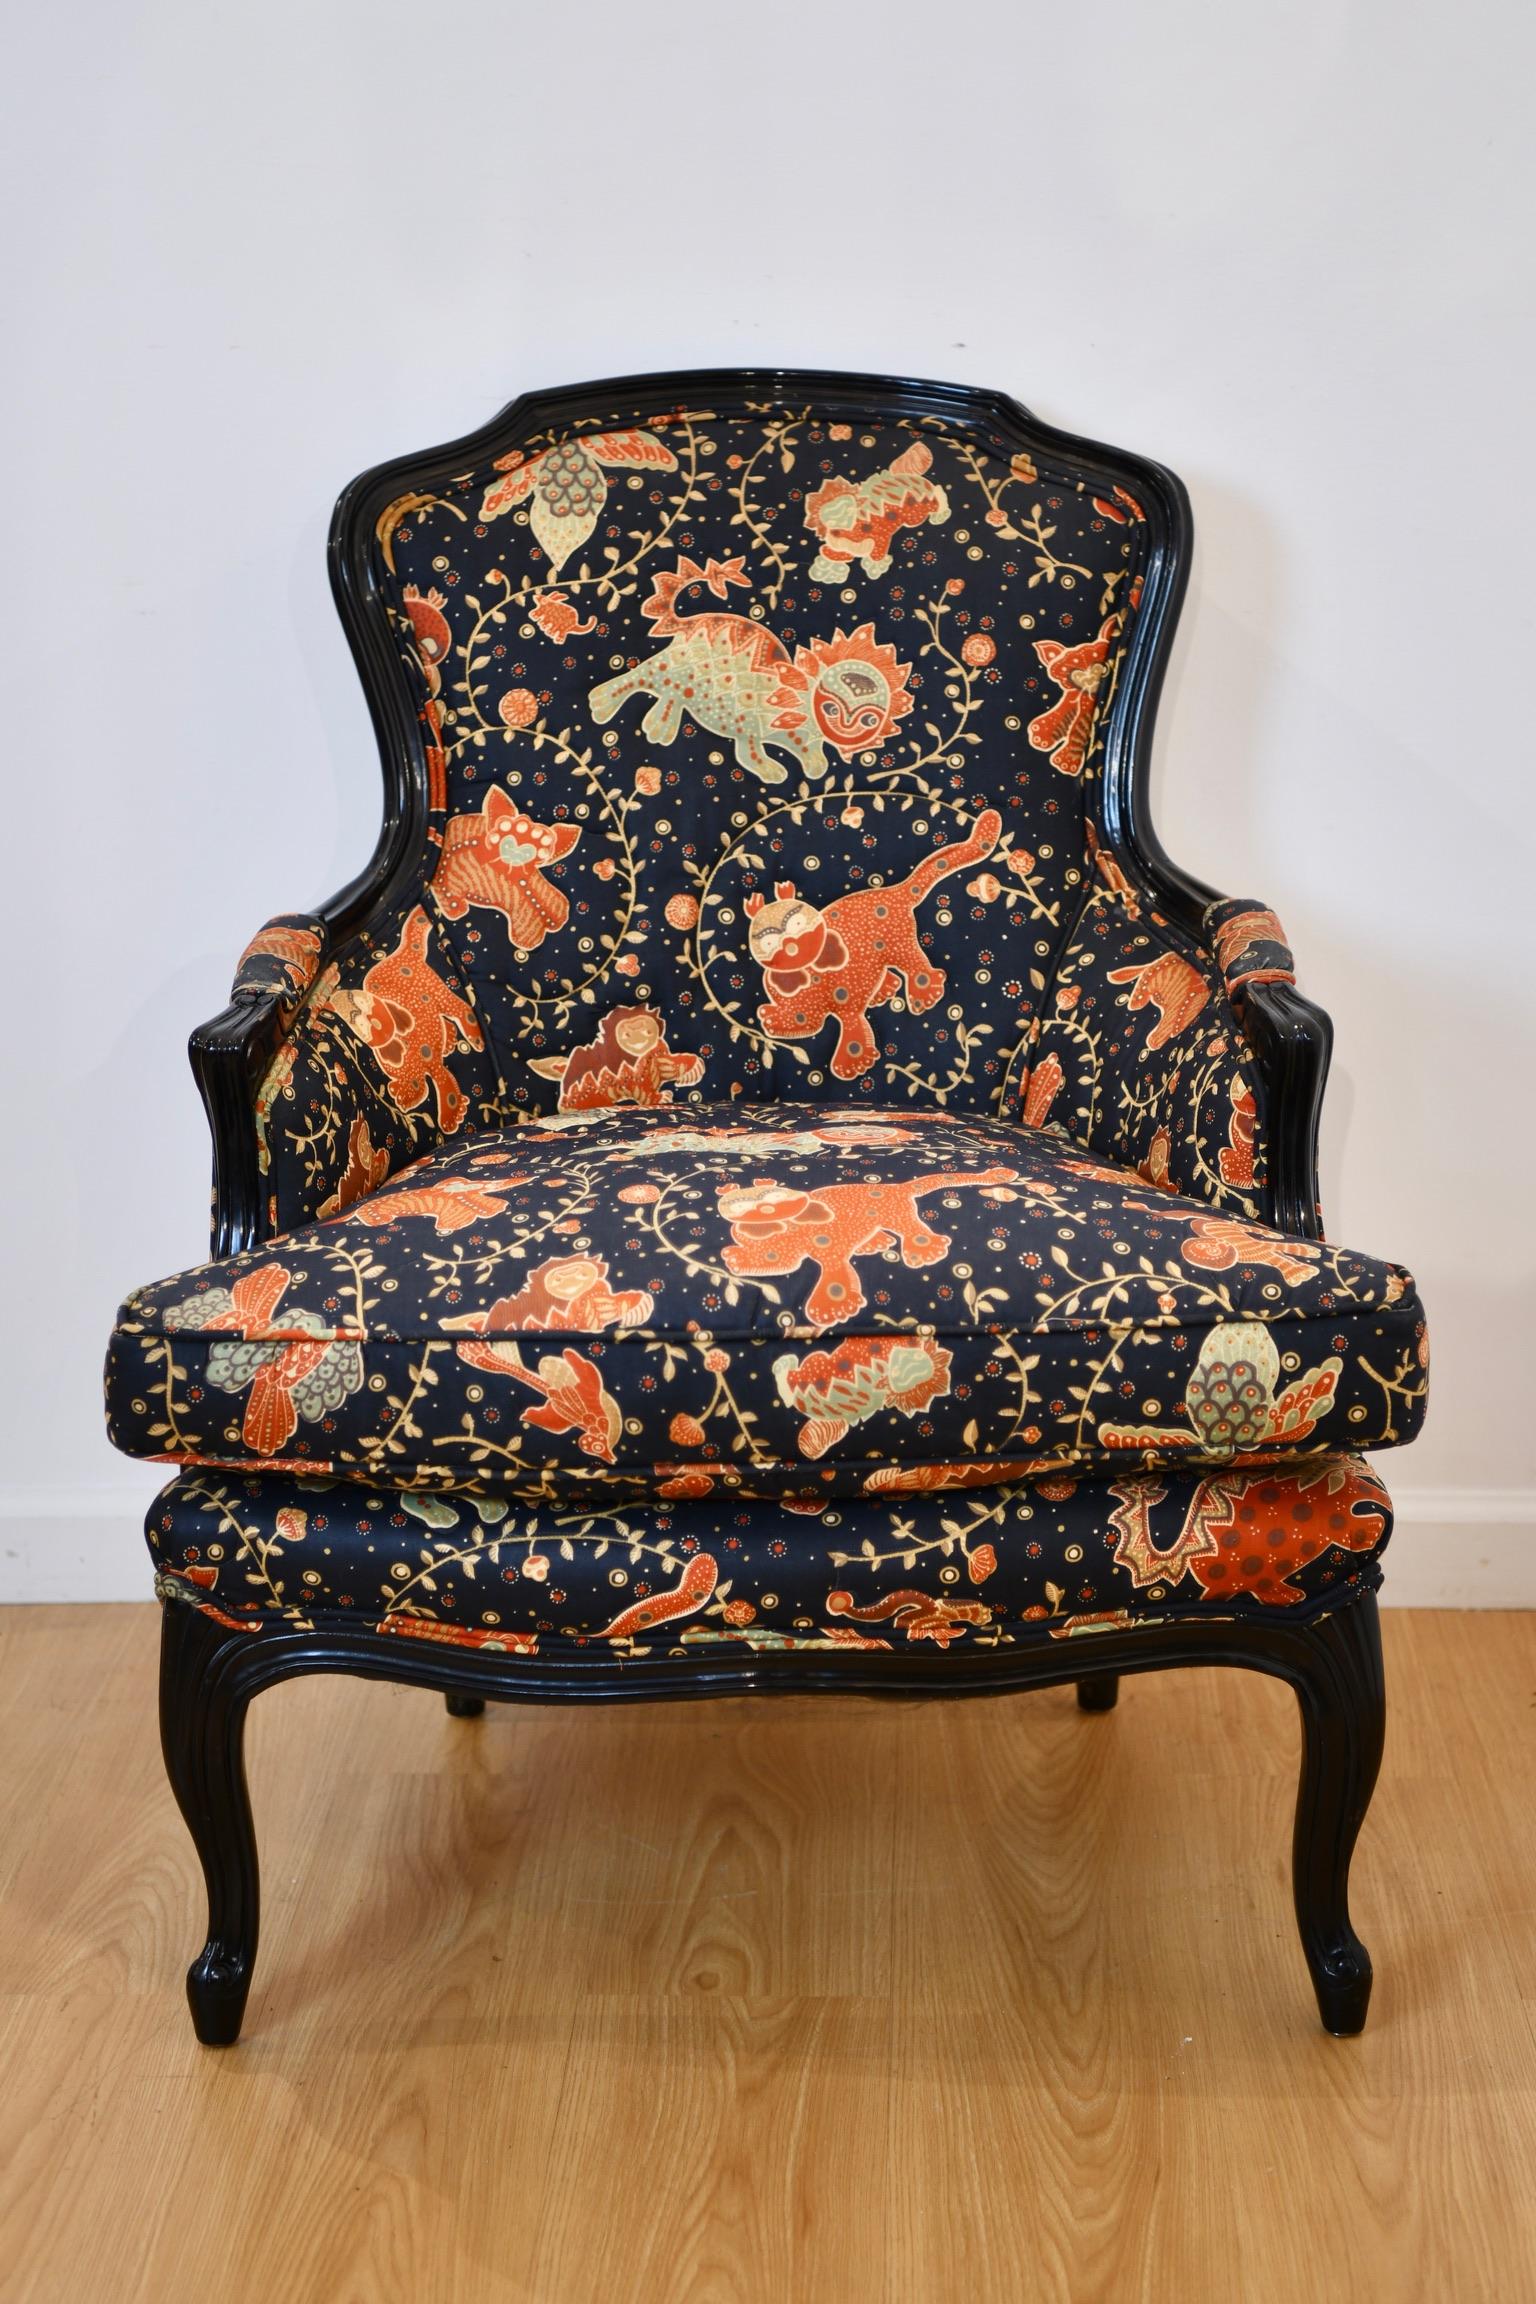 Antique Louis XV style bergere with Chinoiserie upholstery. Frame painted in dark blue lacquer. Two available, sold individually. Dimensions: 35